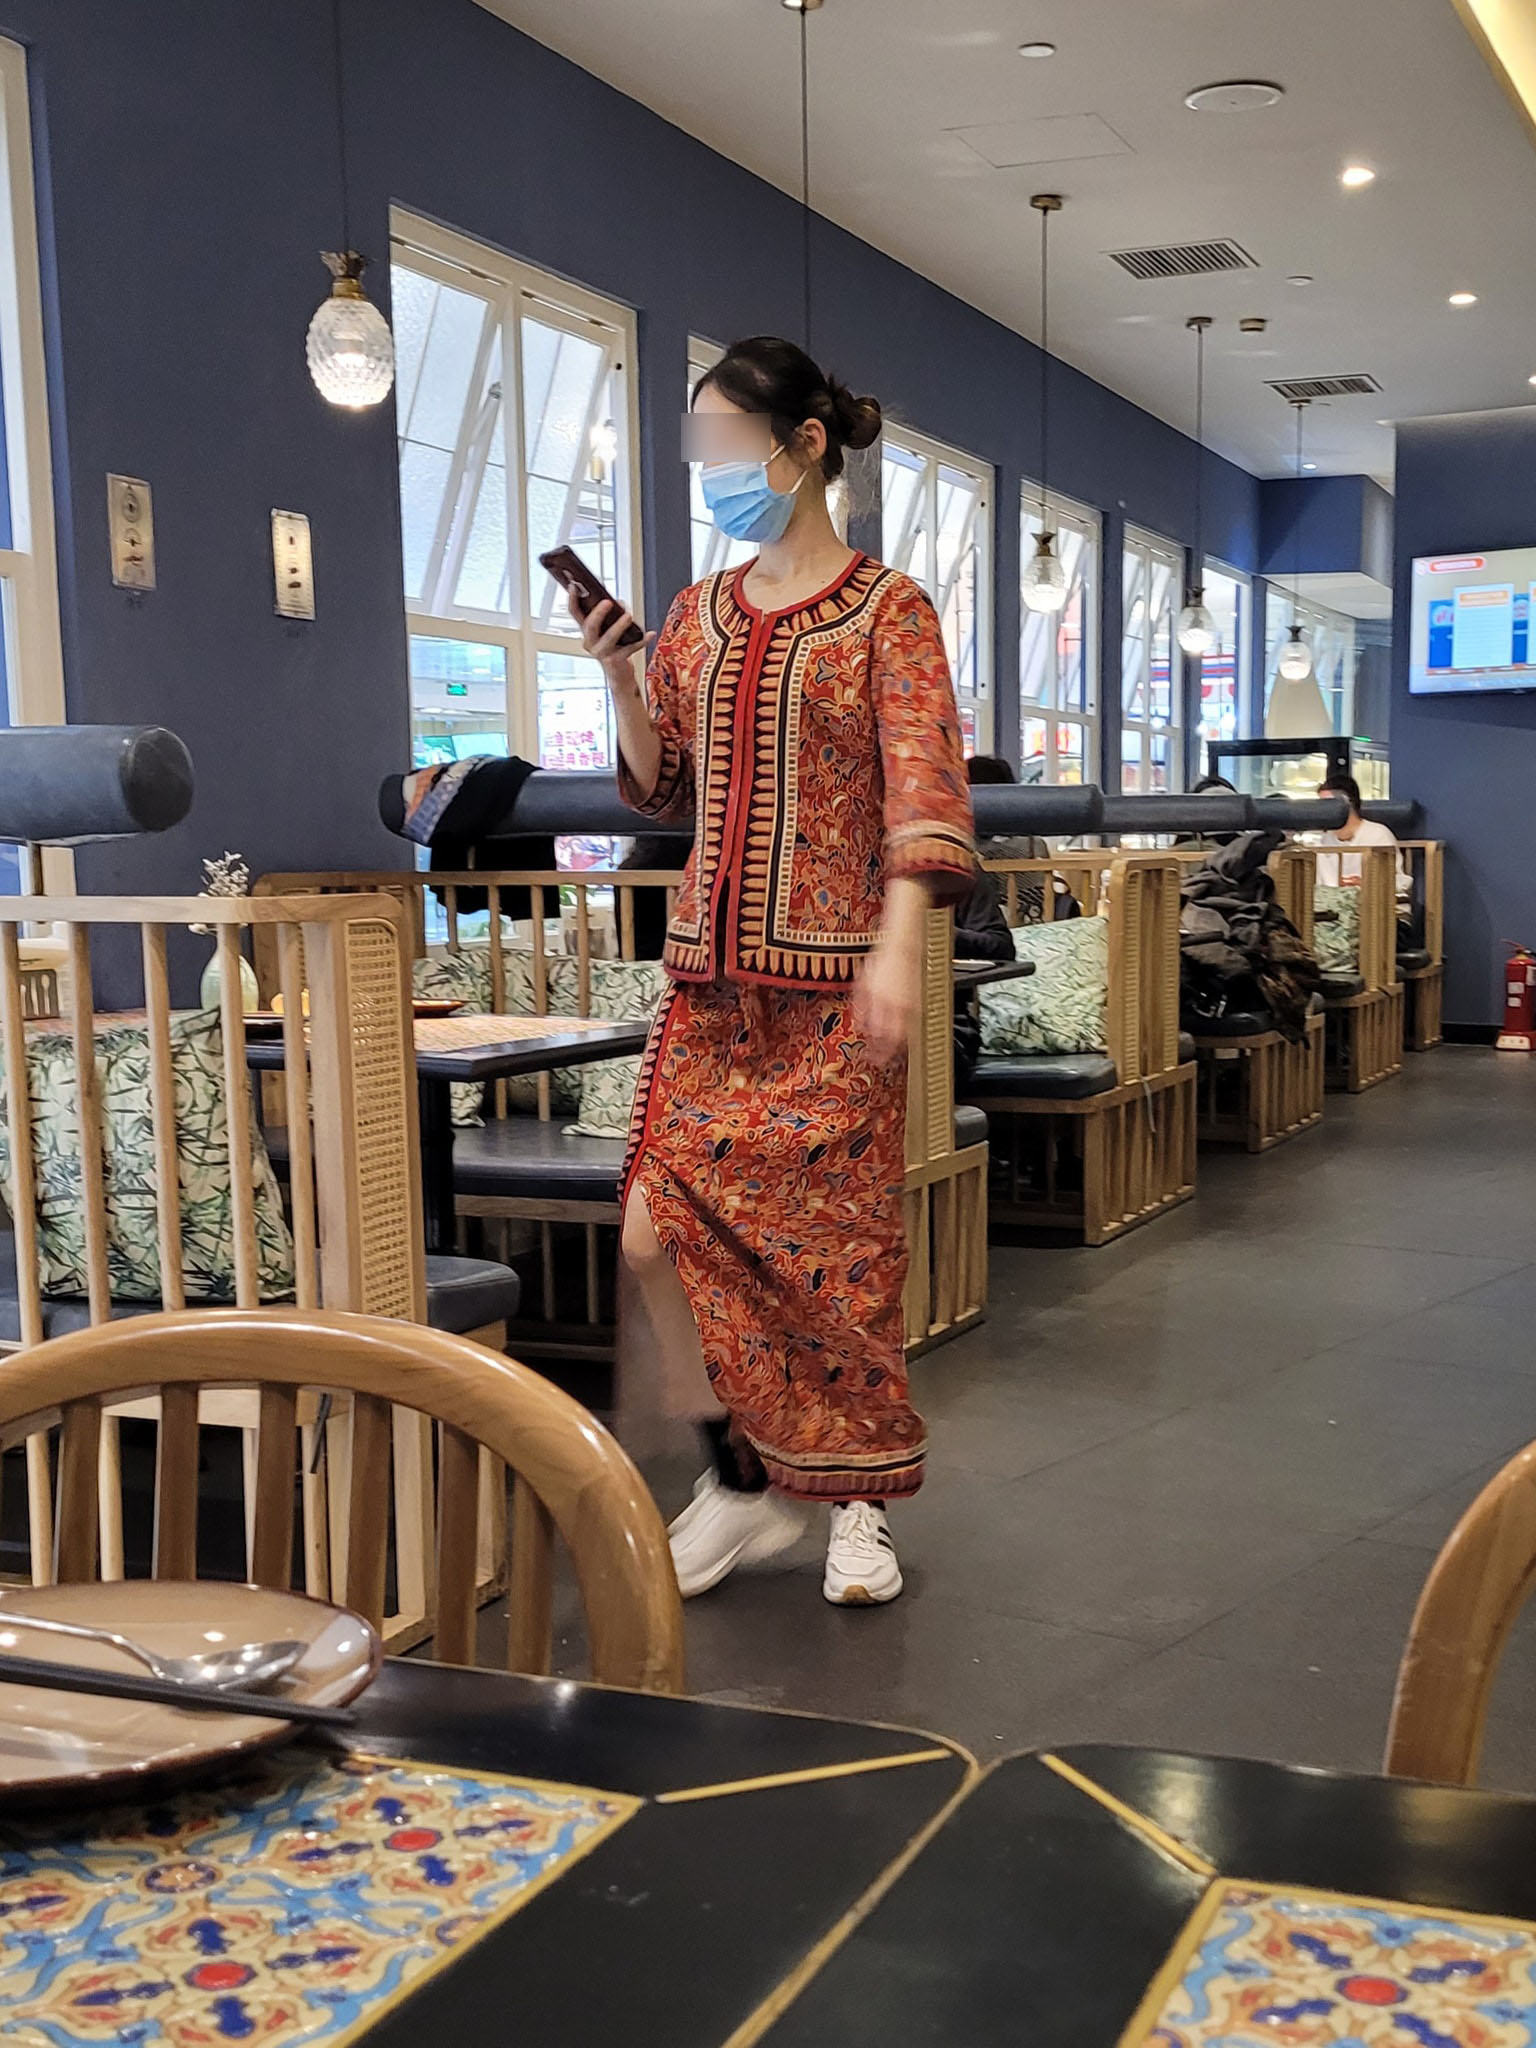 The restaurant waitresses can be seen wearing uniforms similar to ones issued to Singapore Airlines stewardesses. Source: Arthur Pang